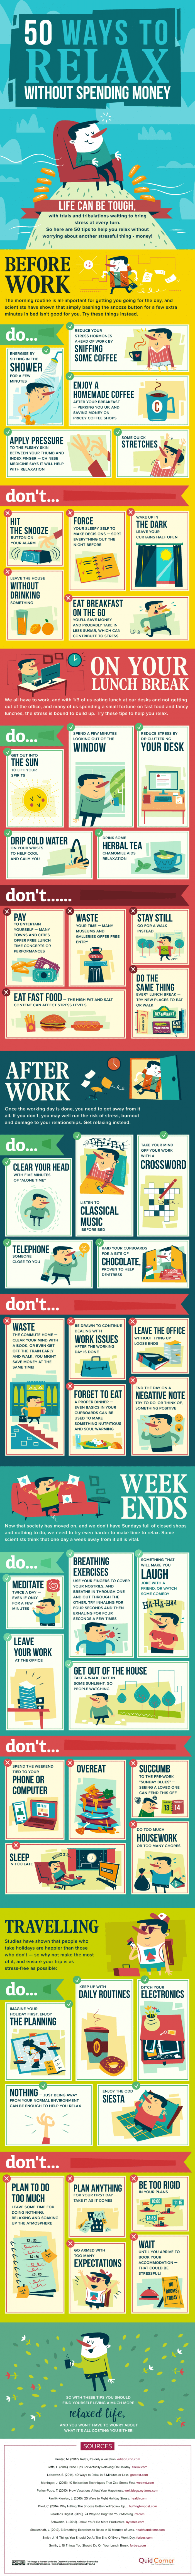 Infographic that will teach you how to relax your mind and body.